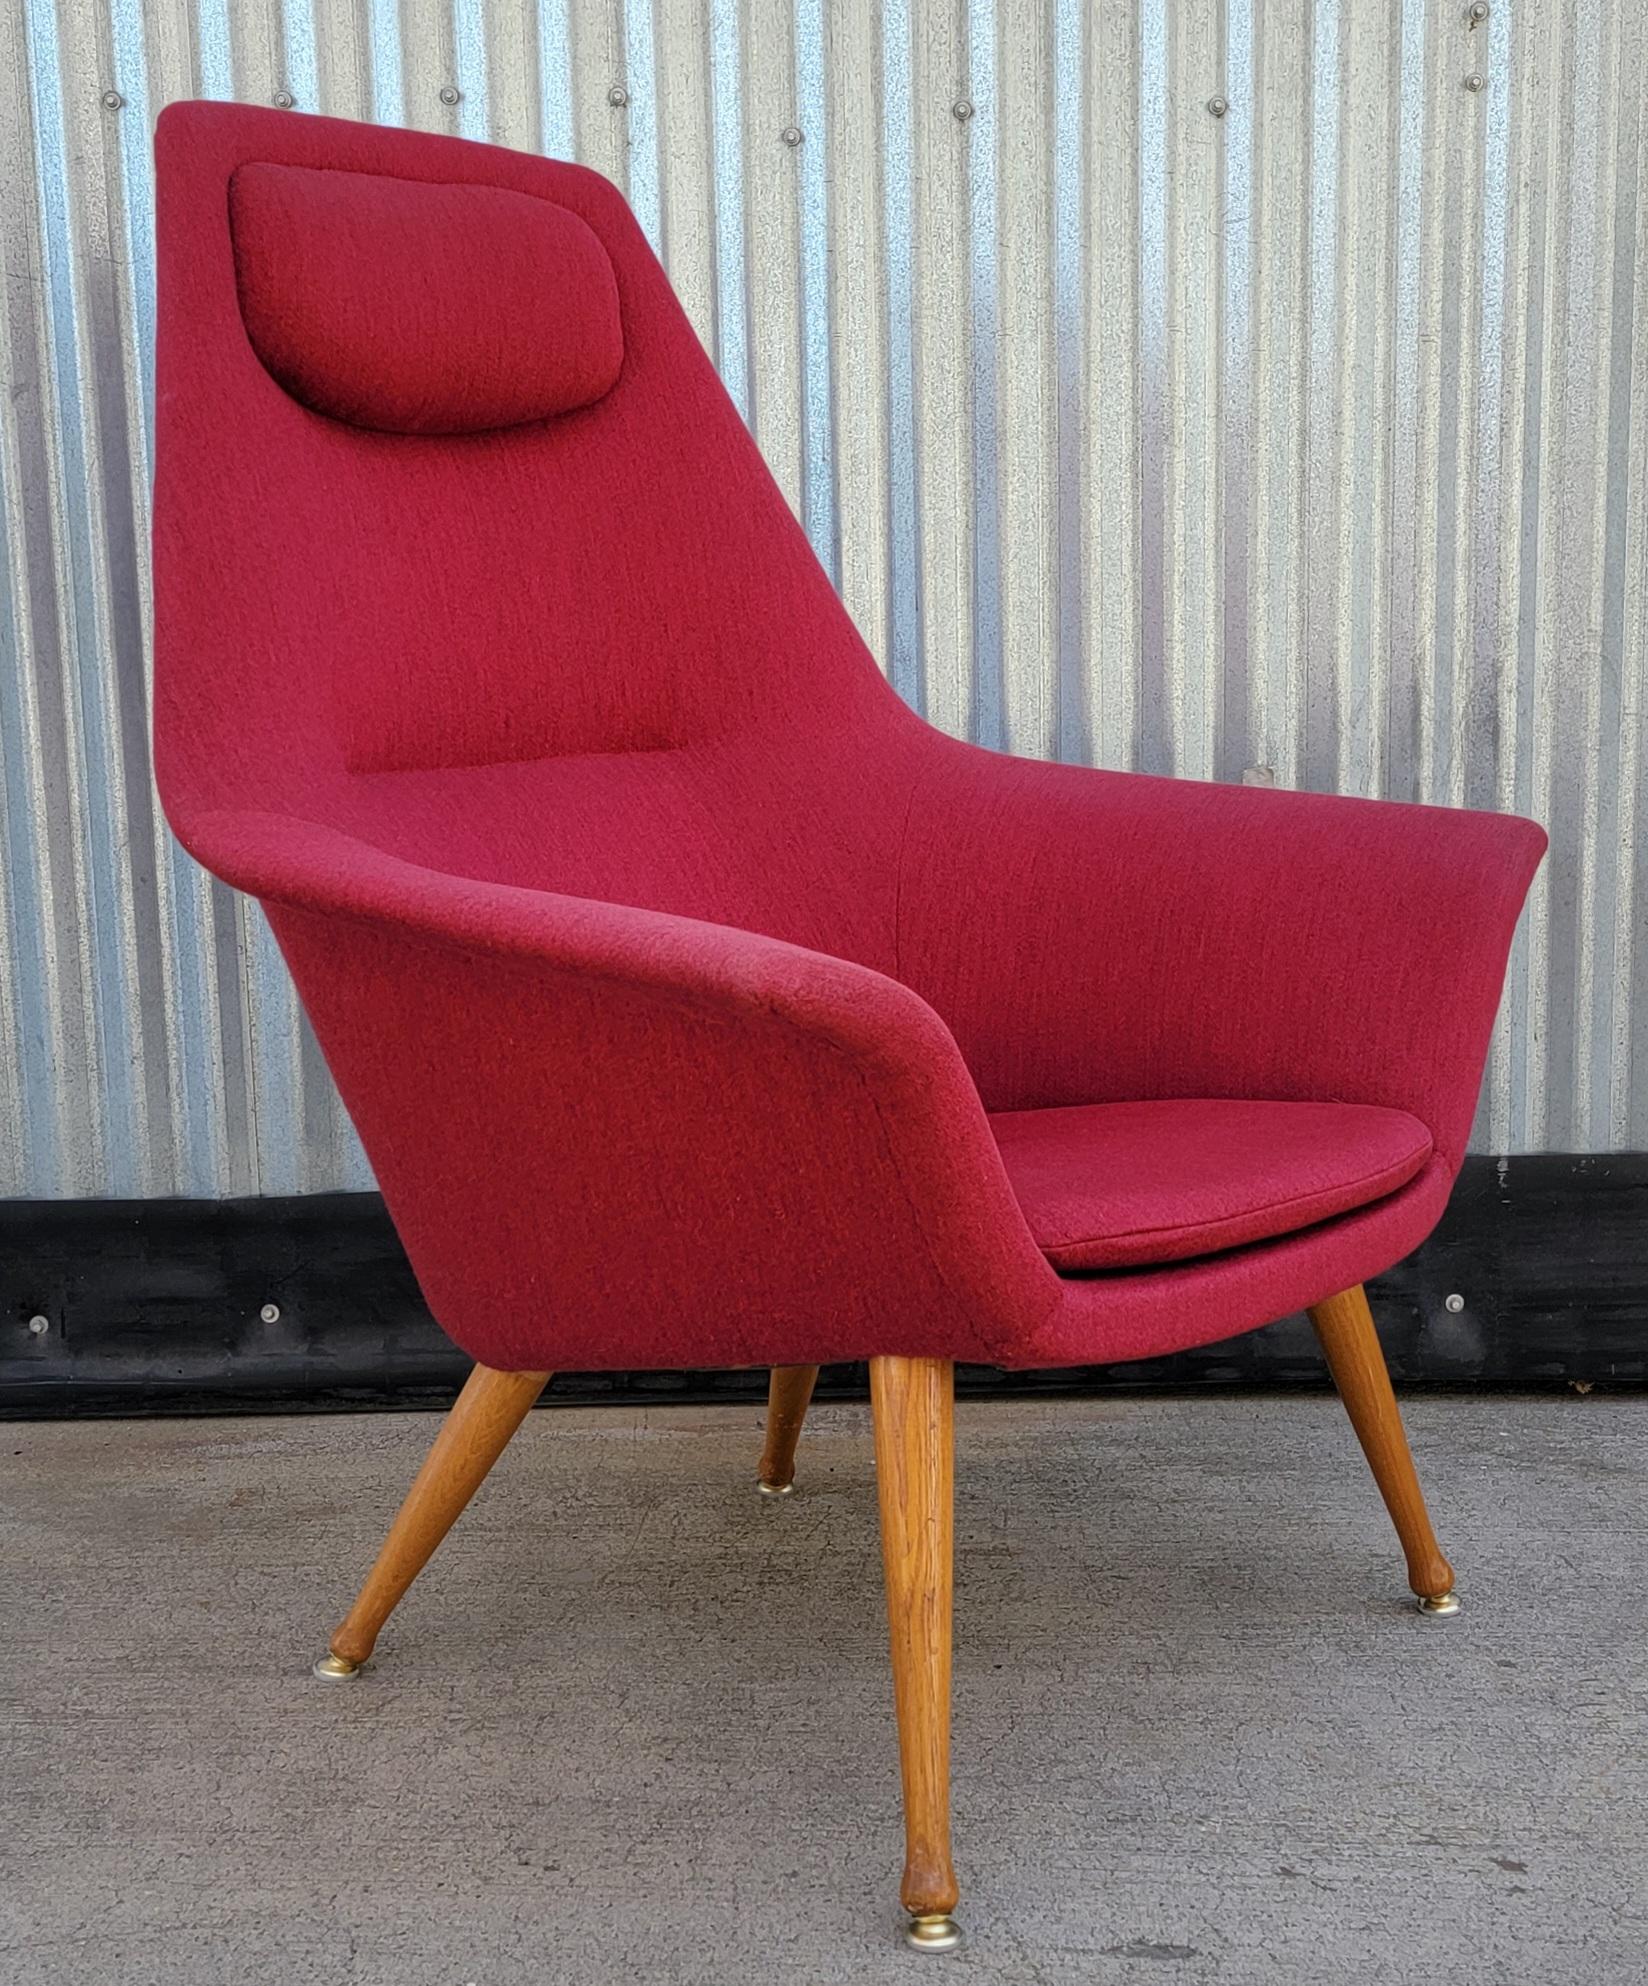 A vintage 1950's Scandinavian Modern upholstered lounge chair designed by Torbjorn Afdal, Norway. The 